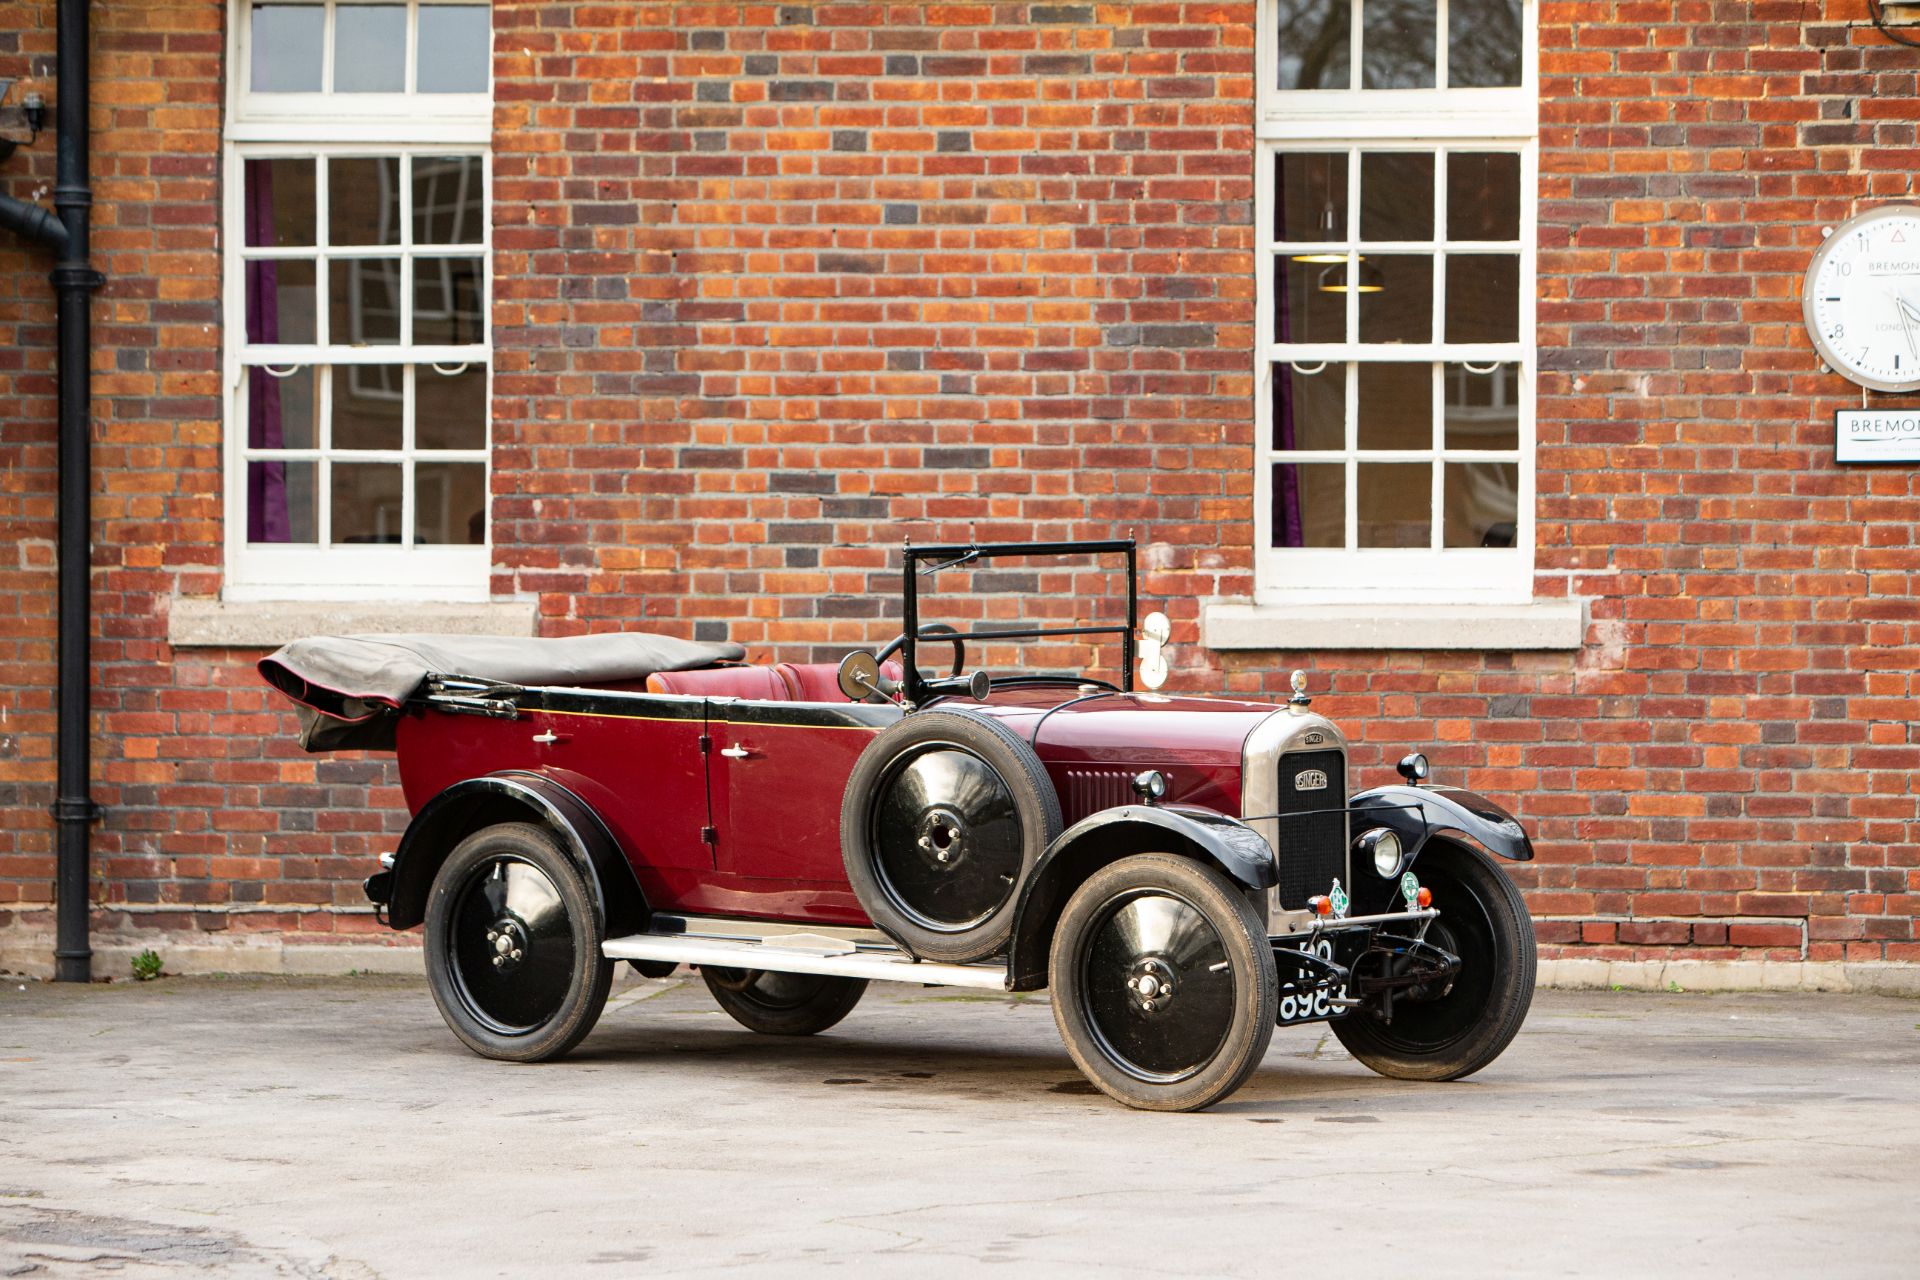 1928 Singer Junior Chassis no. 5235